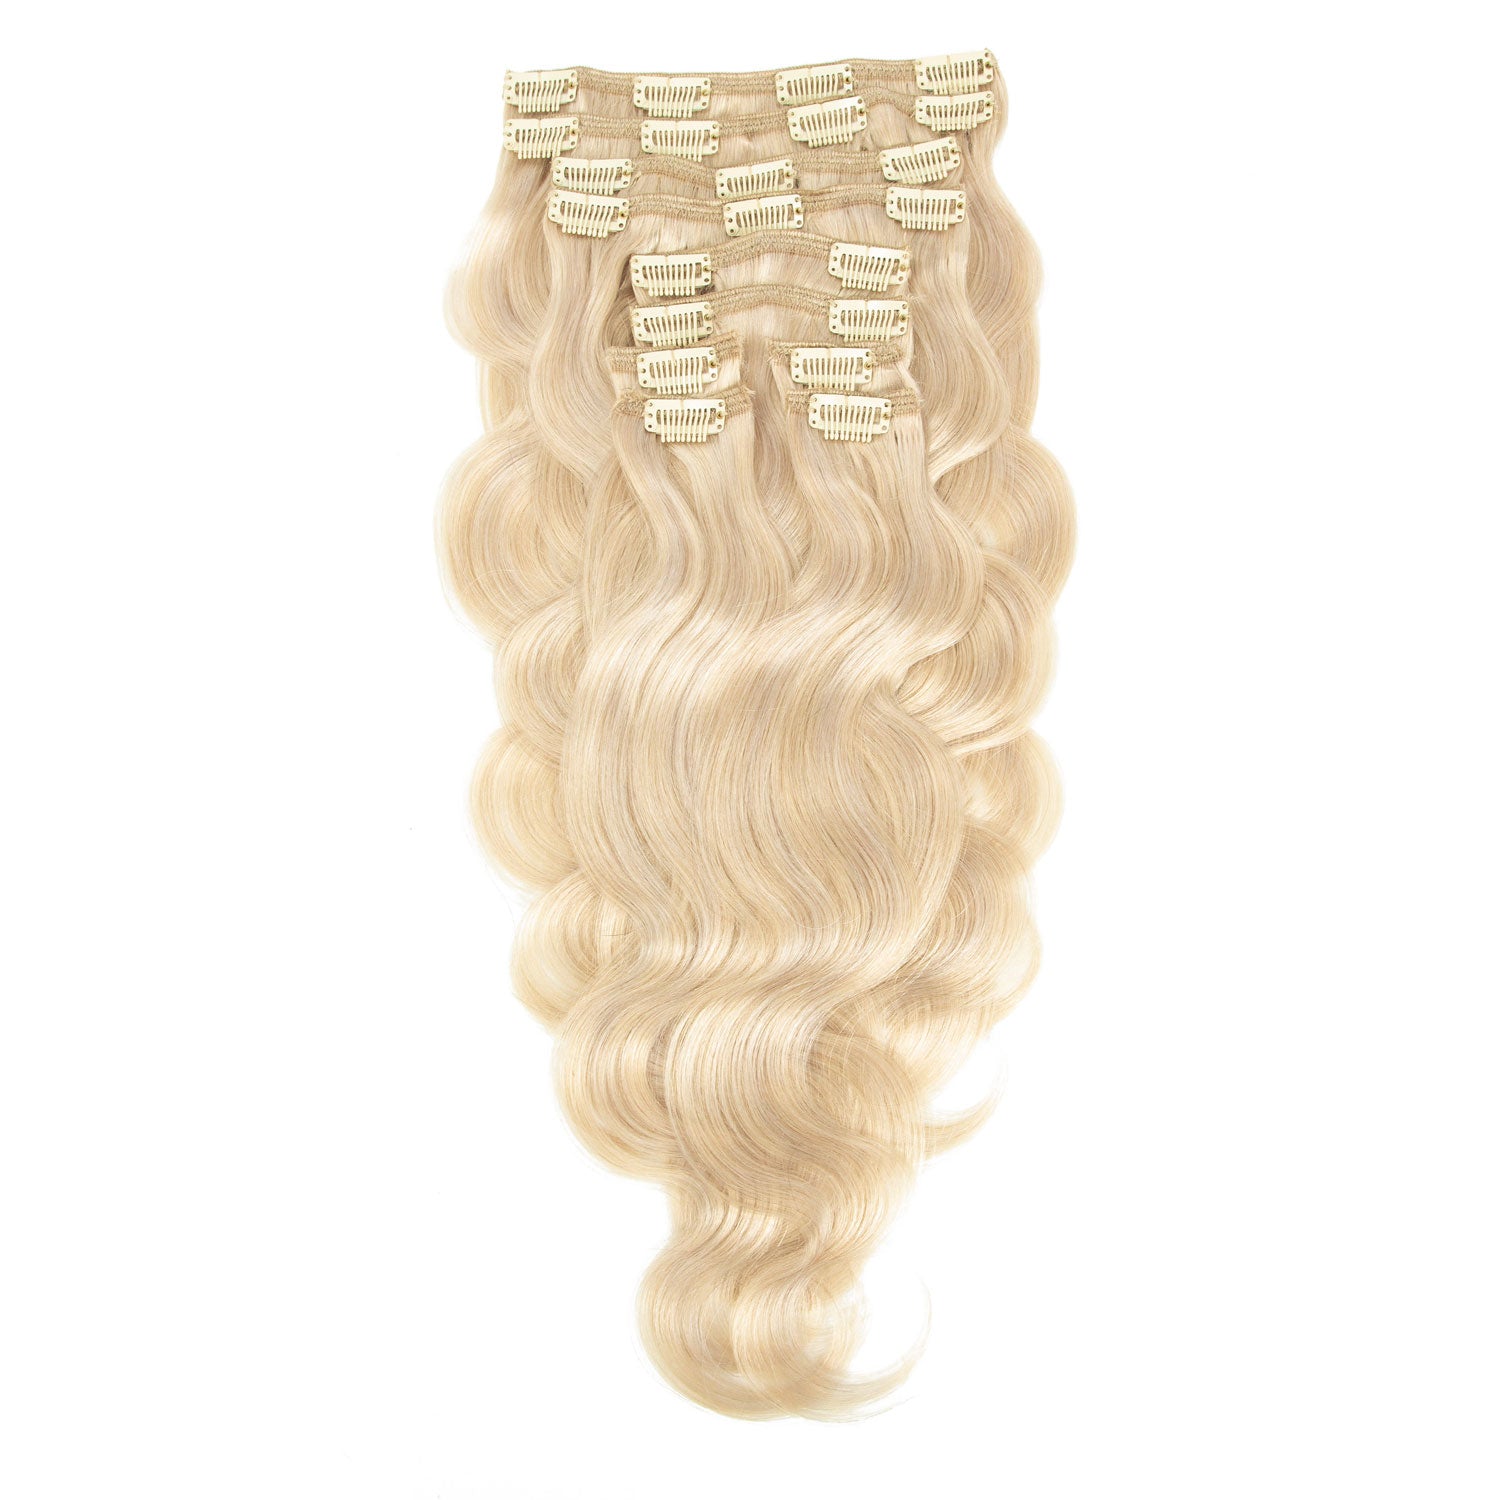 Clip In Wavy Human Hair Extensions #18a/60 Ash and Platinum Blonde Mix 22"